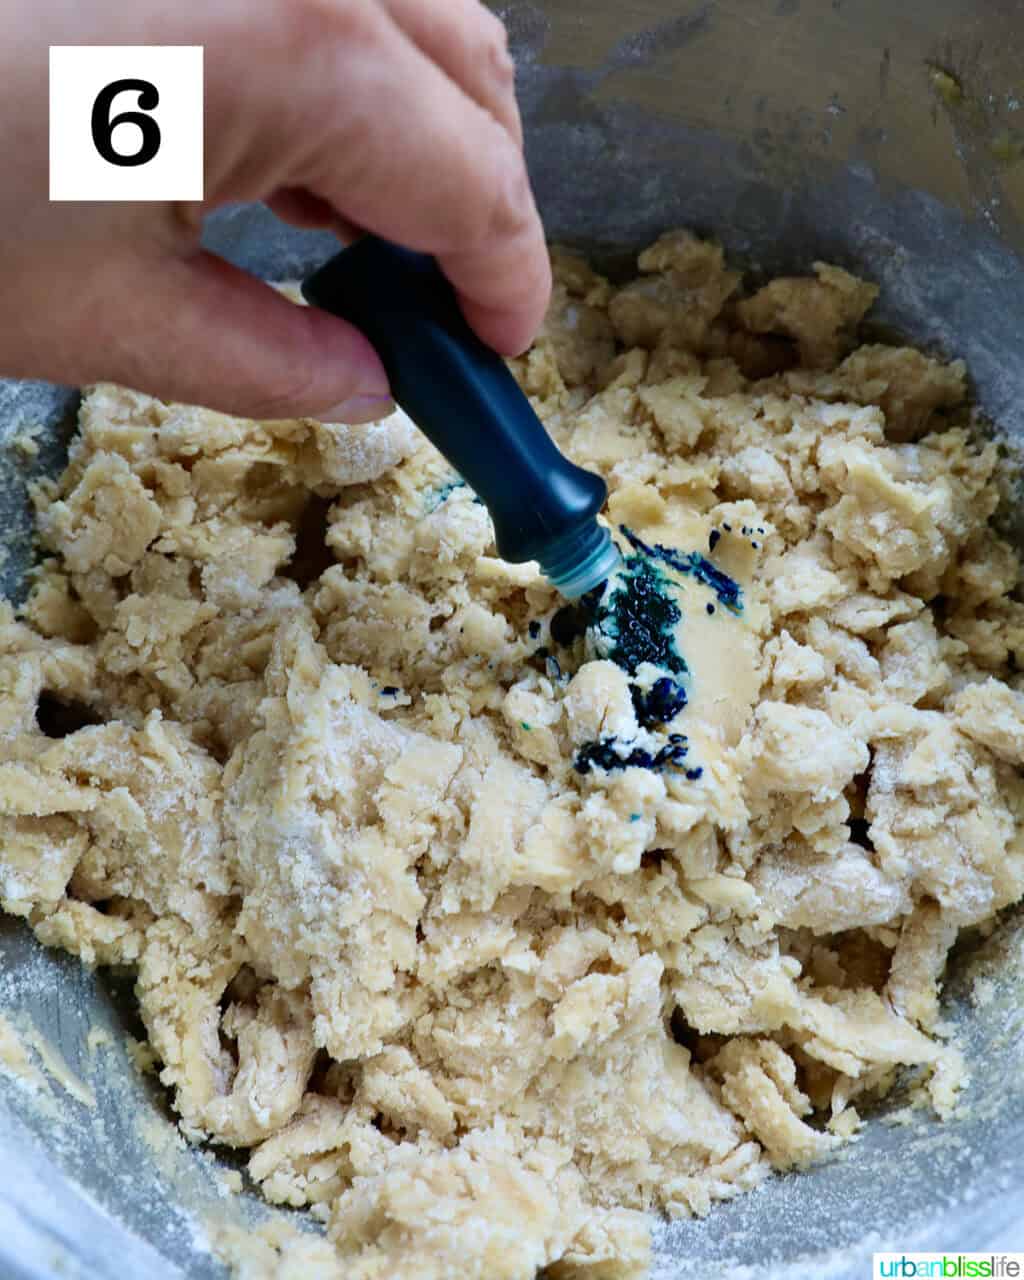 adding food coloring to a bowl with cookie dough.